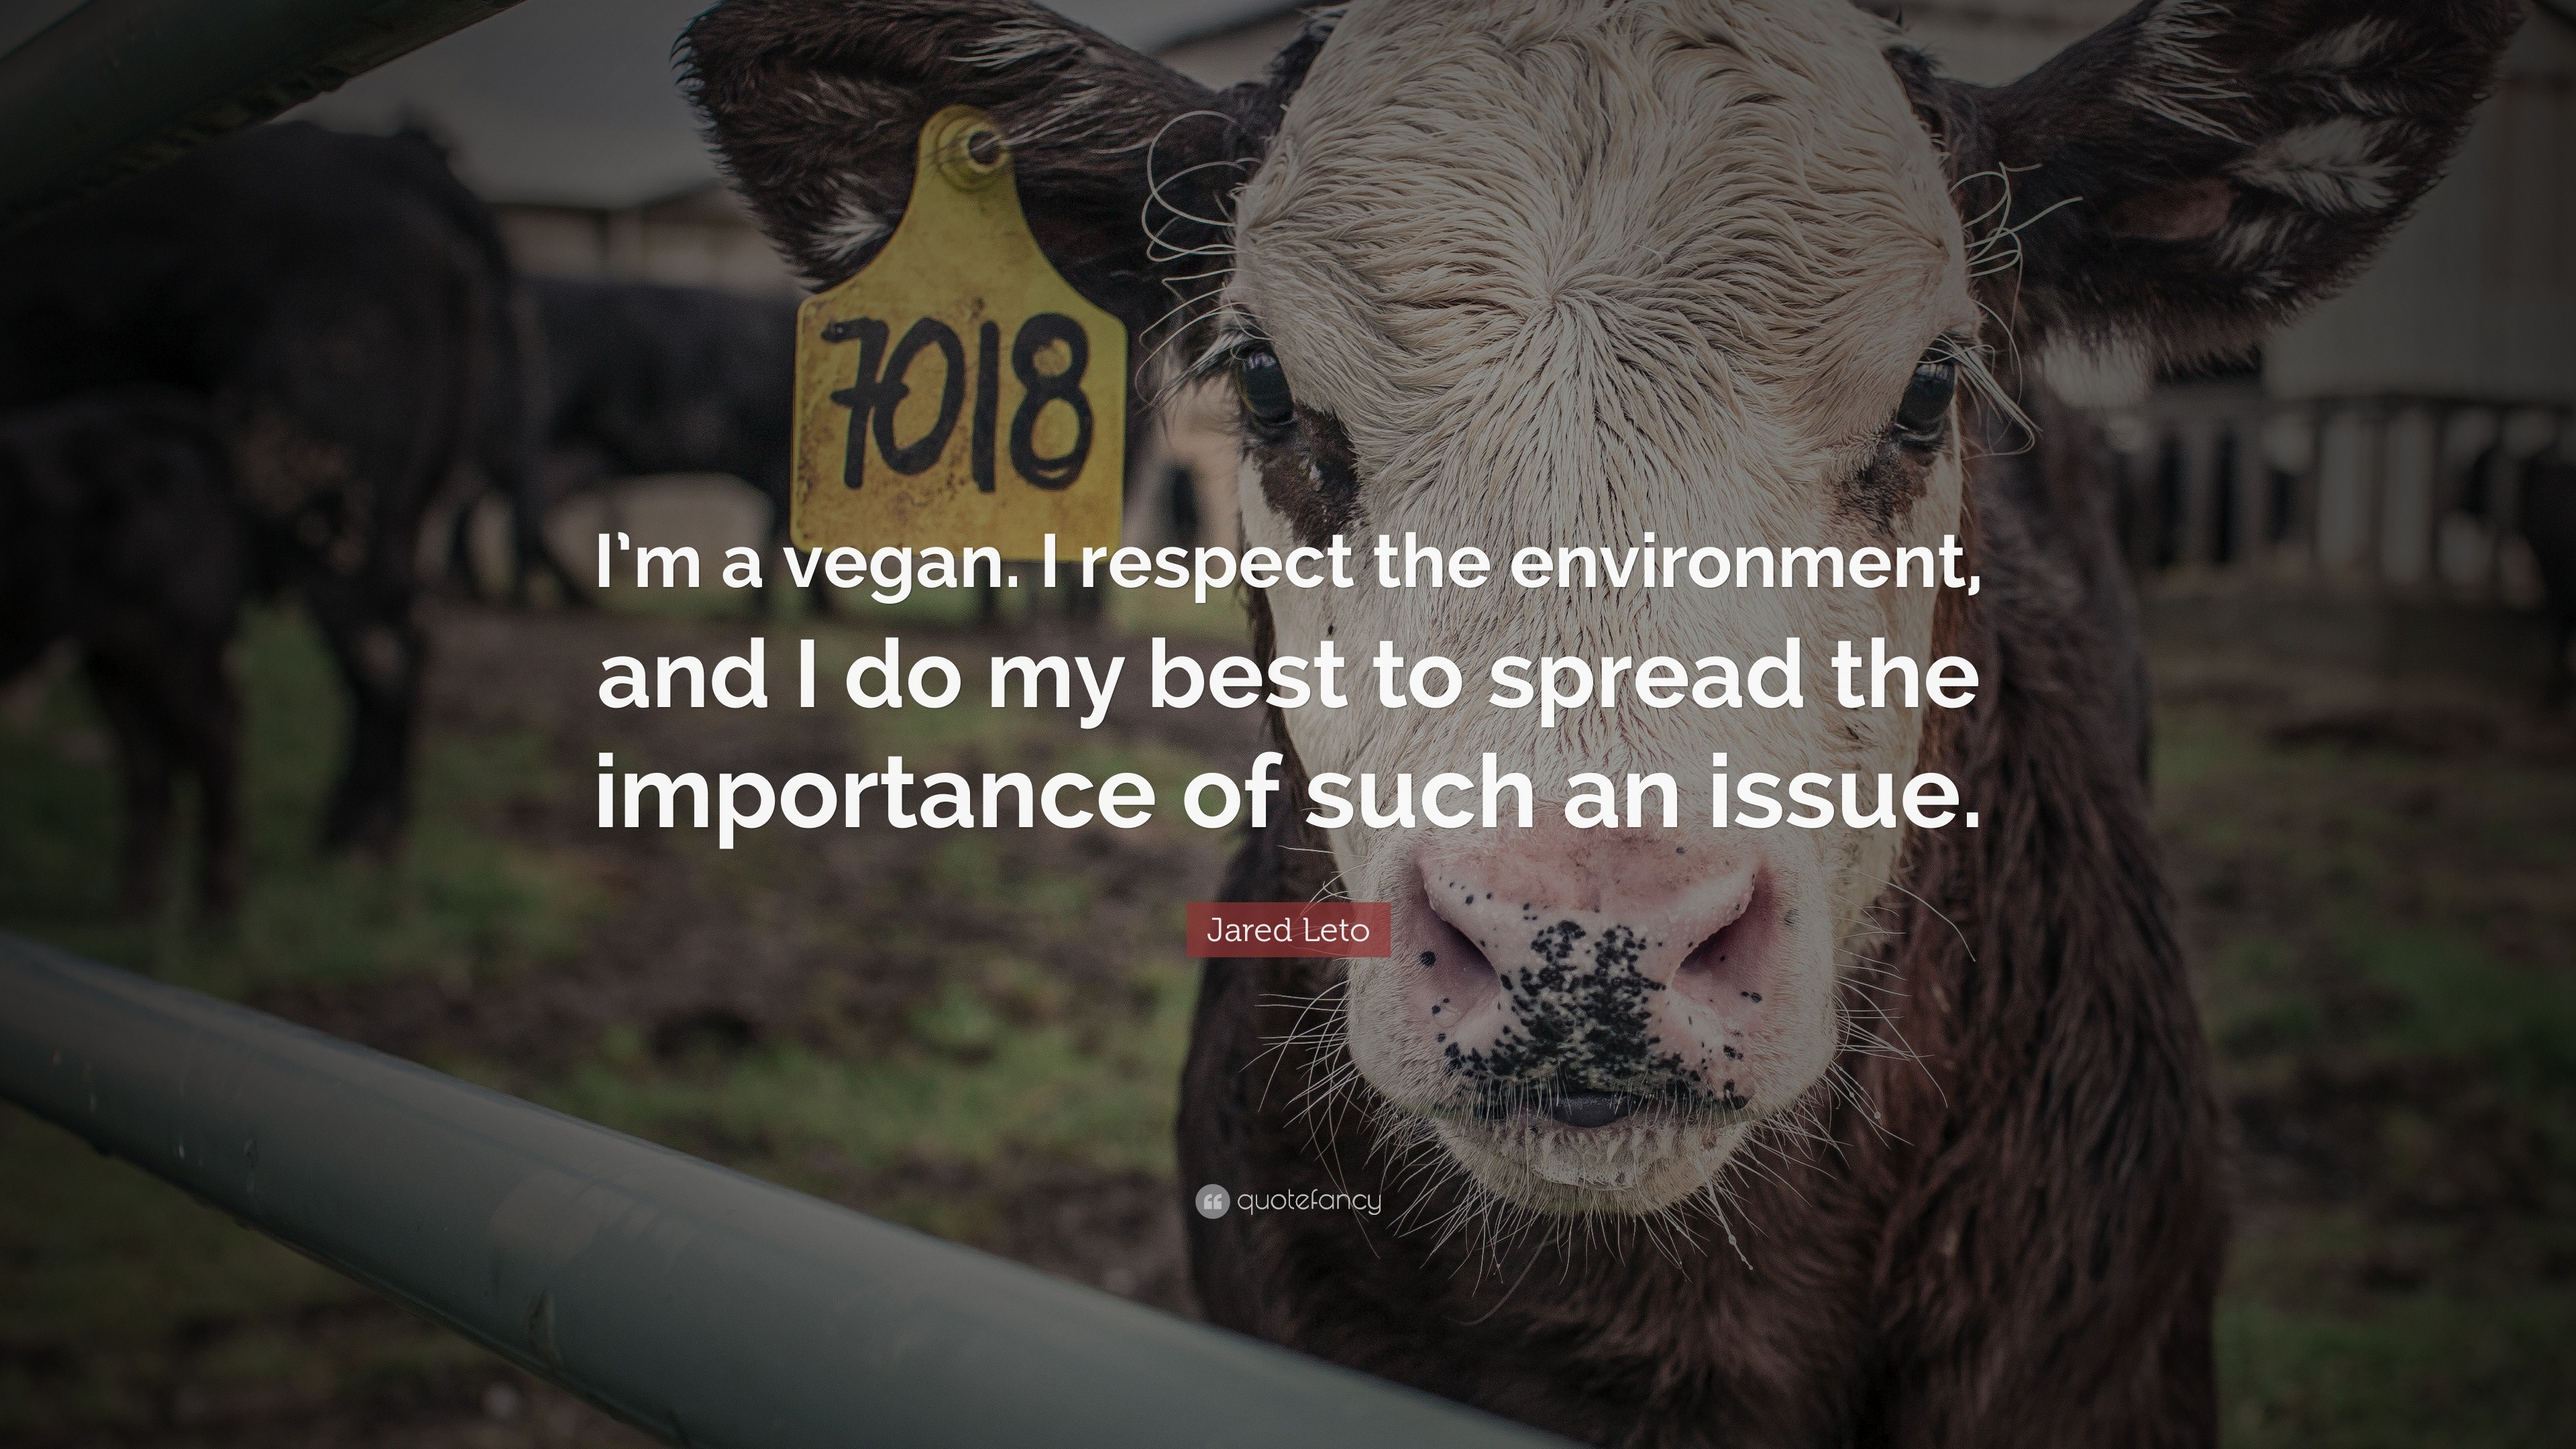 3840x2160 Quotes About Veganism: “I'm a vegan. I respect the environment,